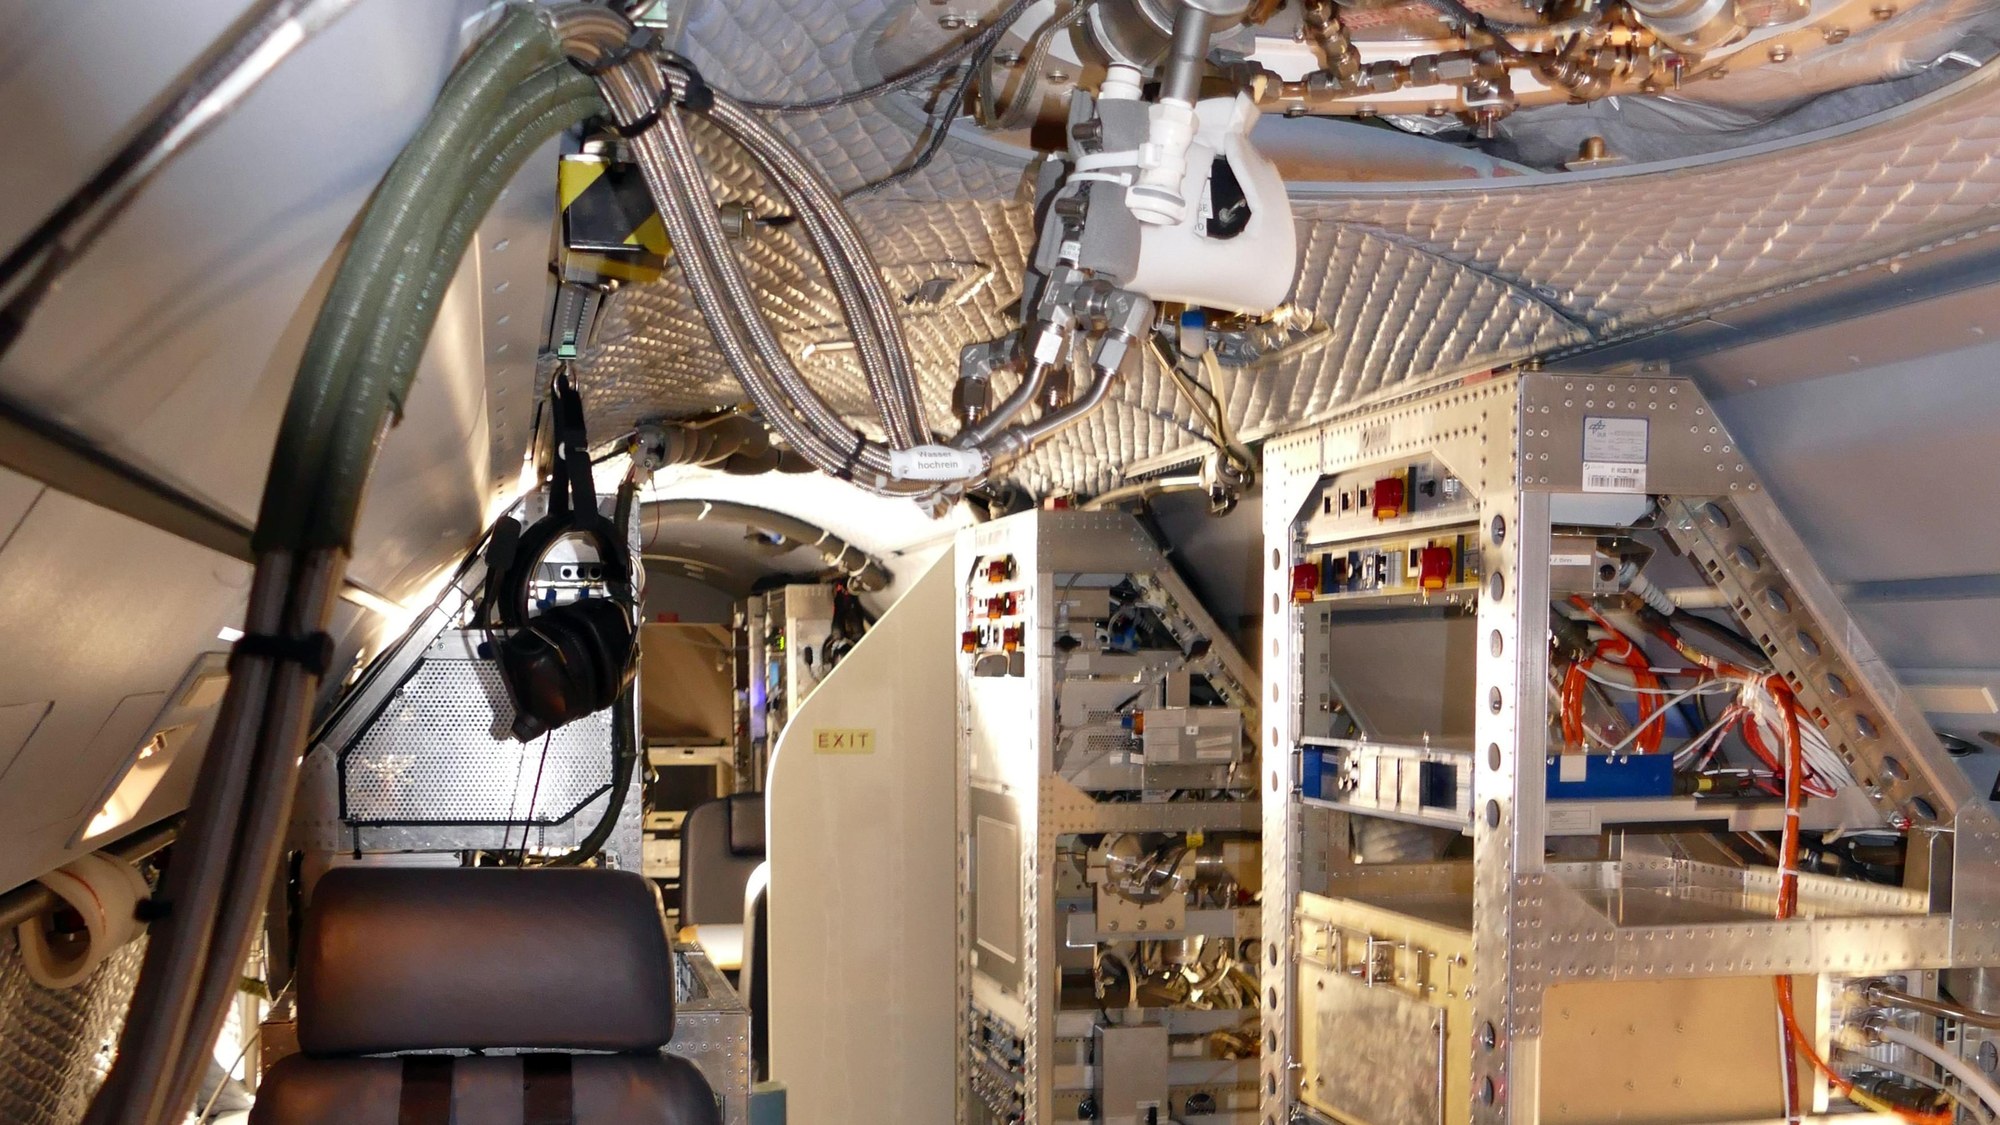 Interior of HALO showing the scientific instruments